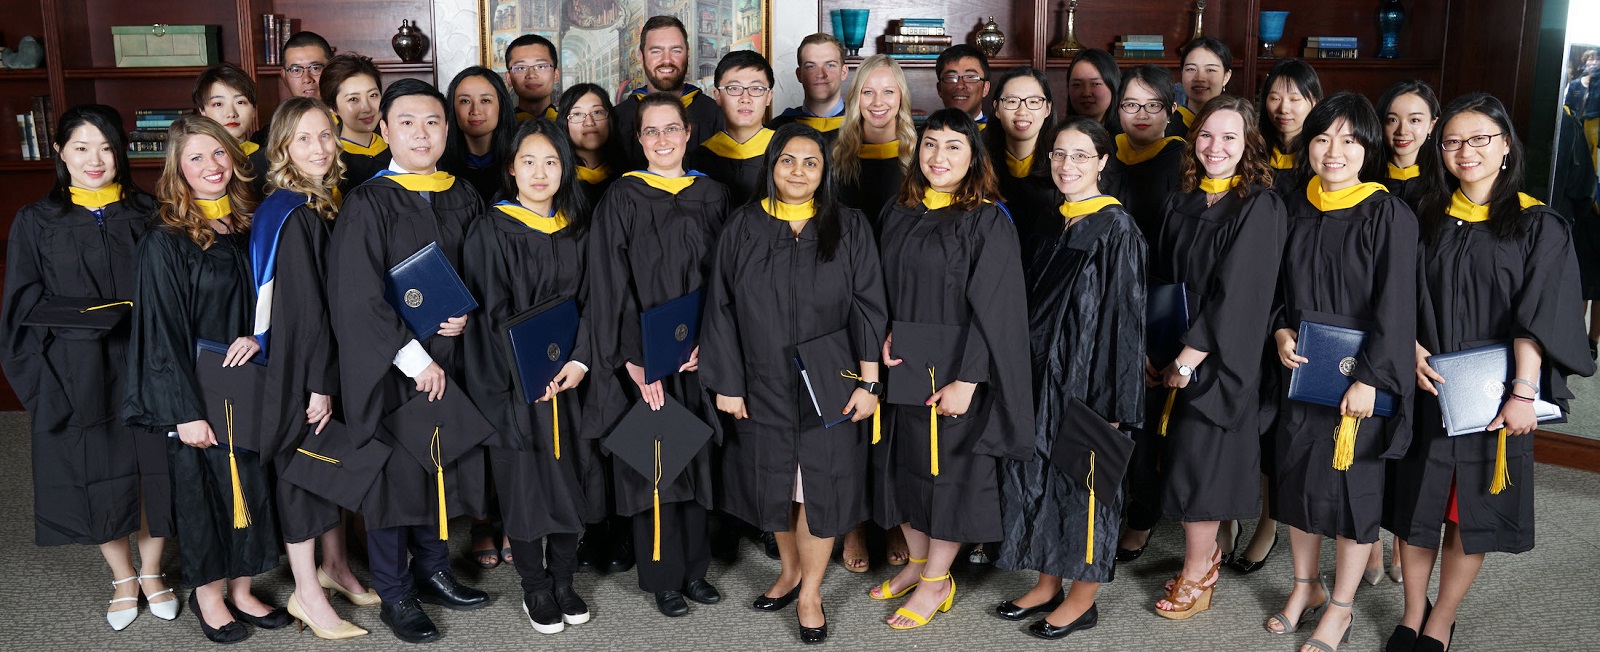 Master Of Biostatistics Class Of 2017 wearing gowns, holding caps and diplomas